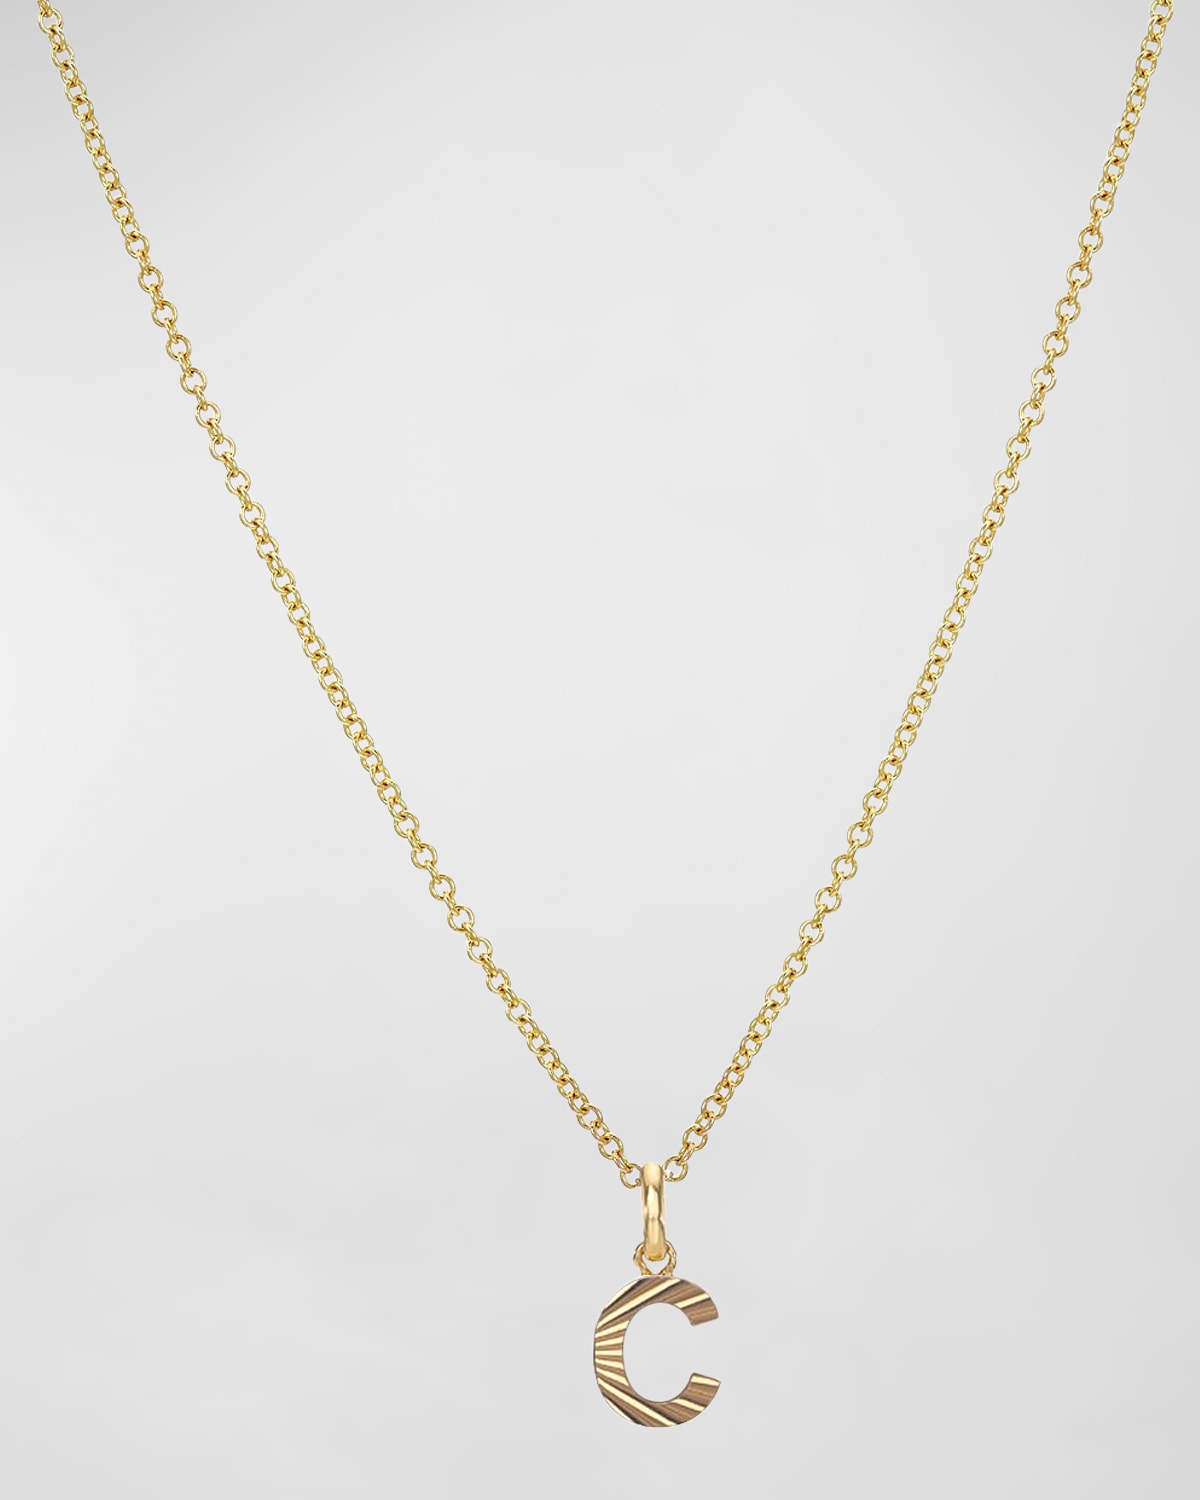 Zoe Lev Jewelry 14k Gold Initial Pendant Necklace In C